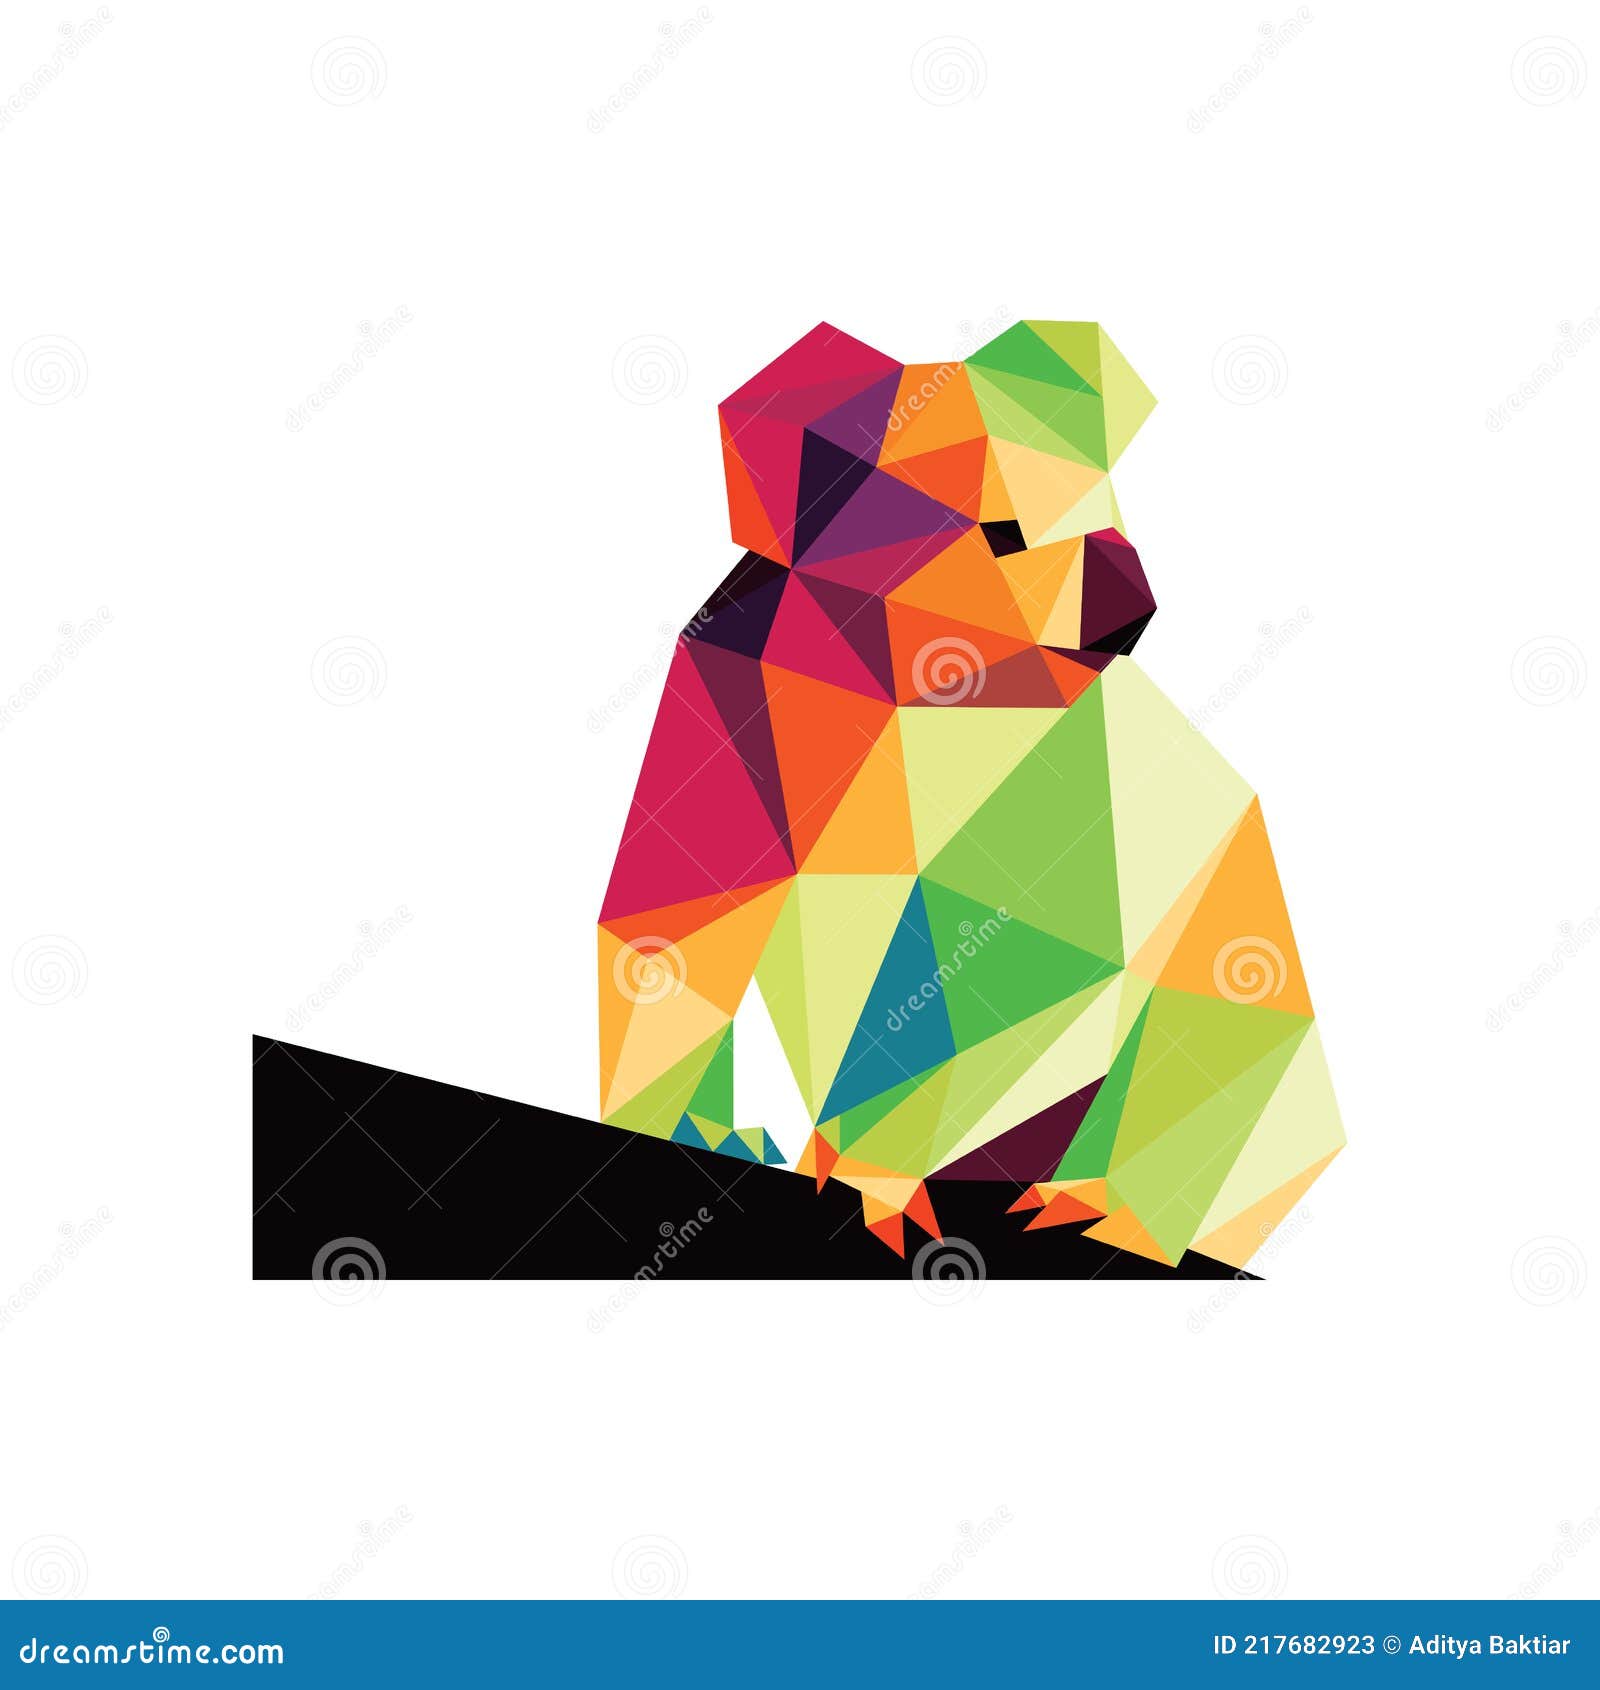 https://thumbs.dreamstime.com/z/colorful-koala-polygonal-low-poly-logo-icon-abstract-vector-silhouette-217682923.jpg